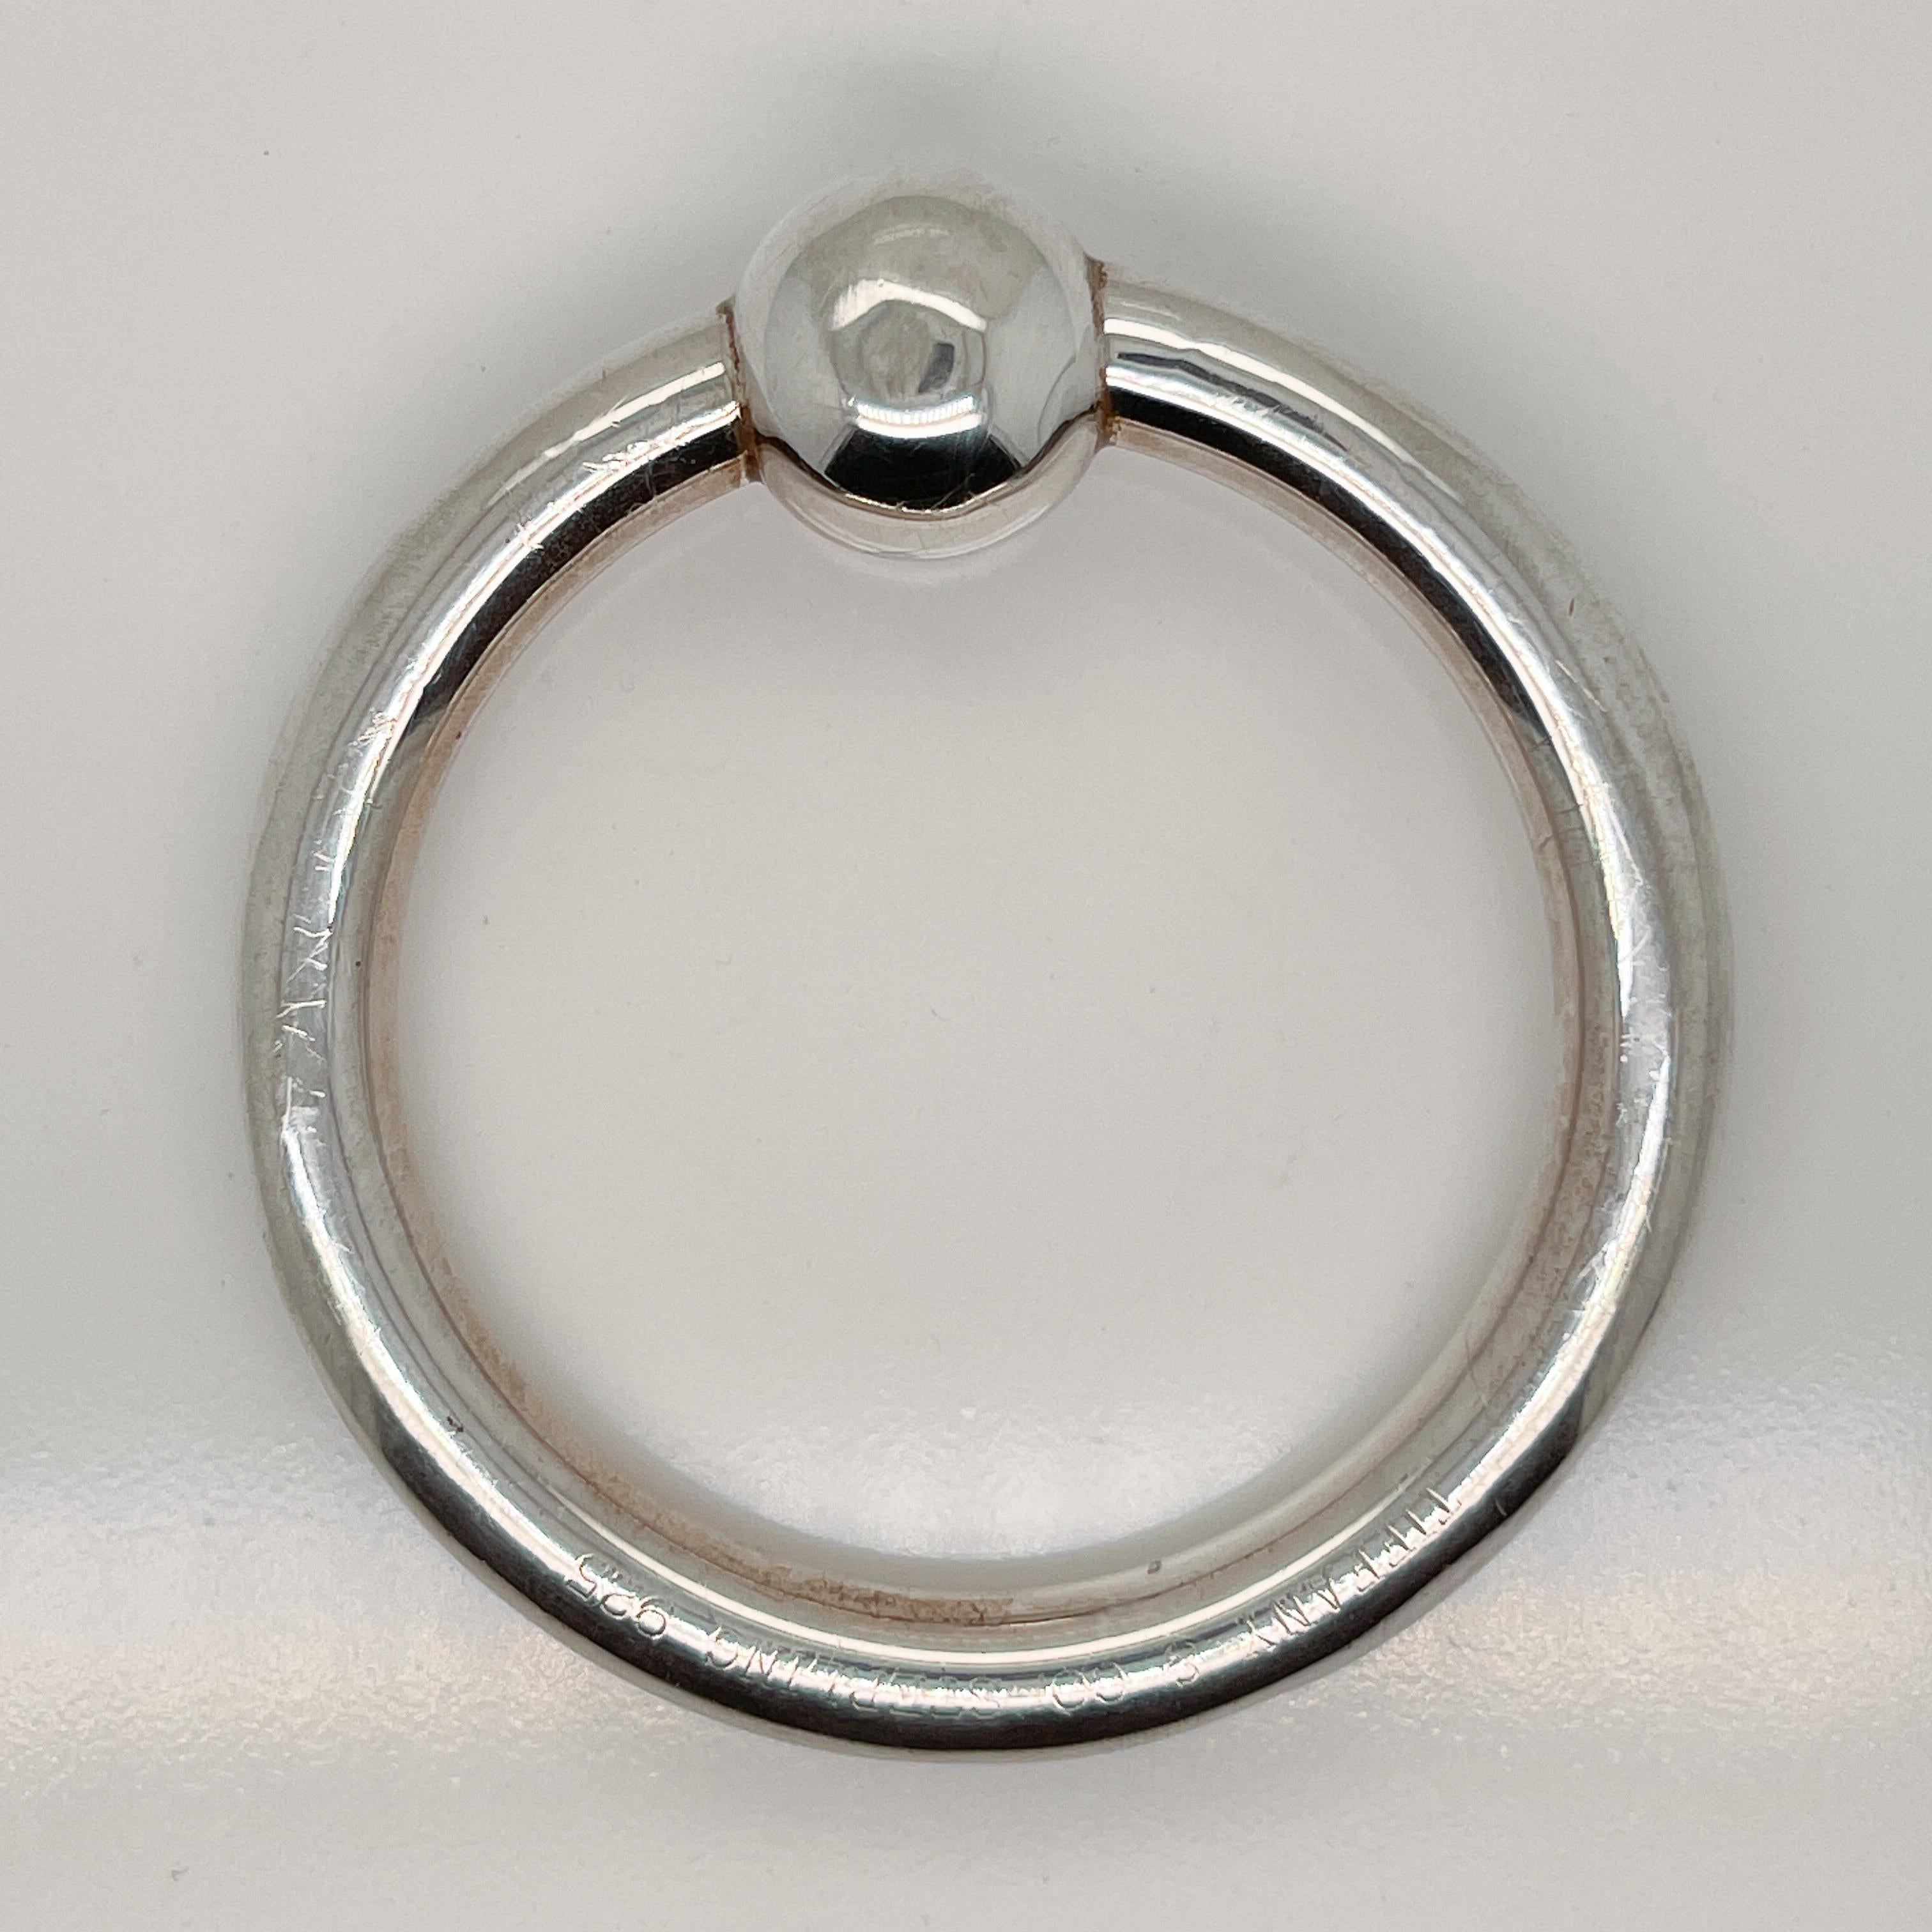 Old or Antique Tiffany & Co. Sterling Silver Baby Teething Ring In Fair Condition For Sale In Philadelphia, PA